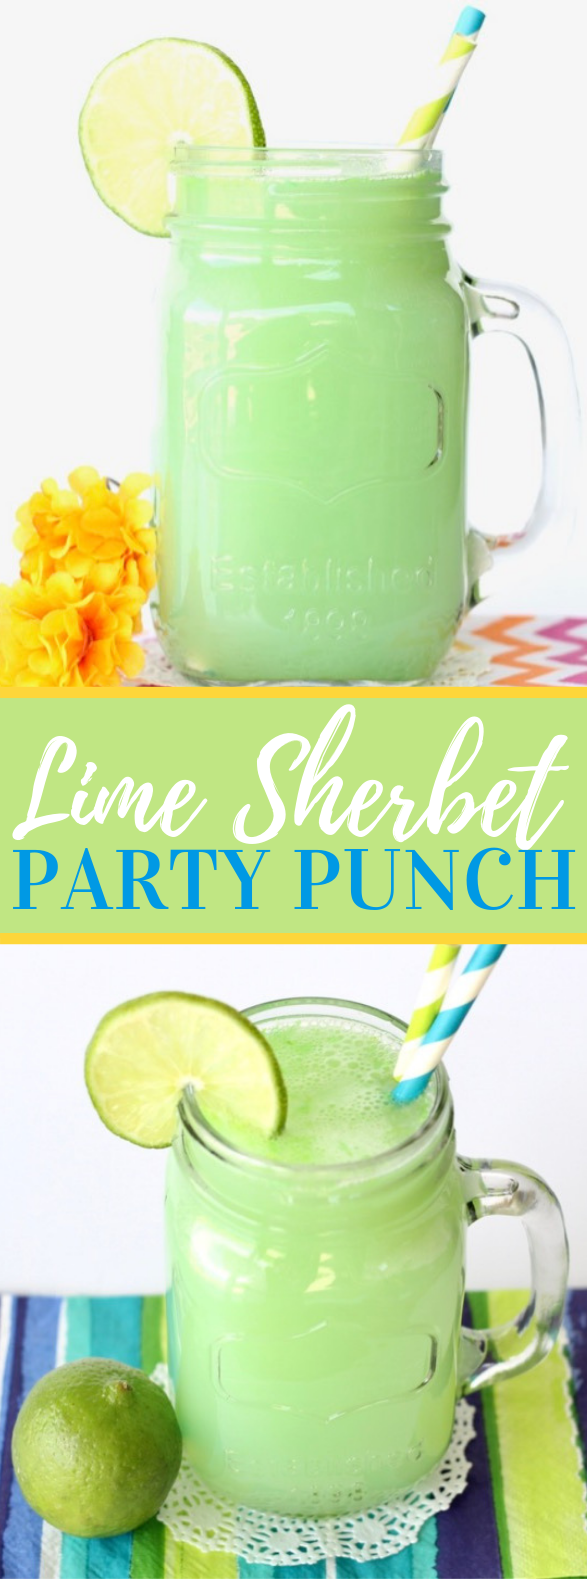 Lime Sherbet Party Punch Recipe! {3 Ingredients} #drinks #partydrink